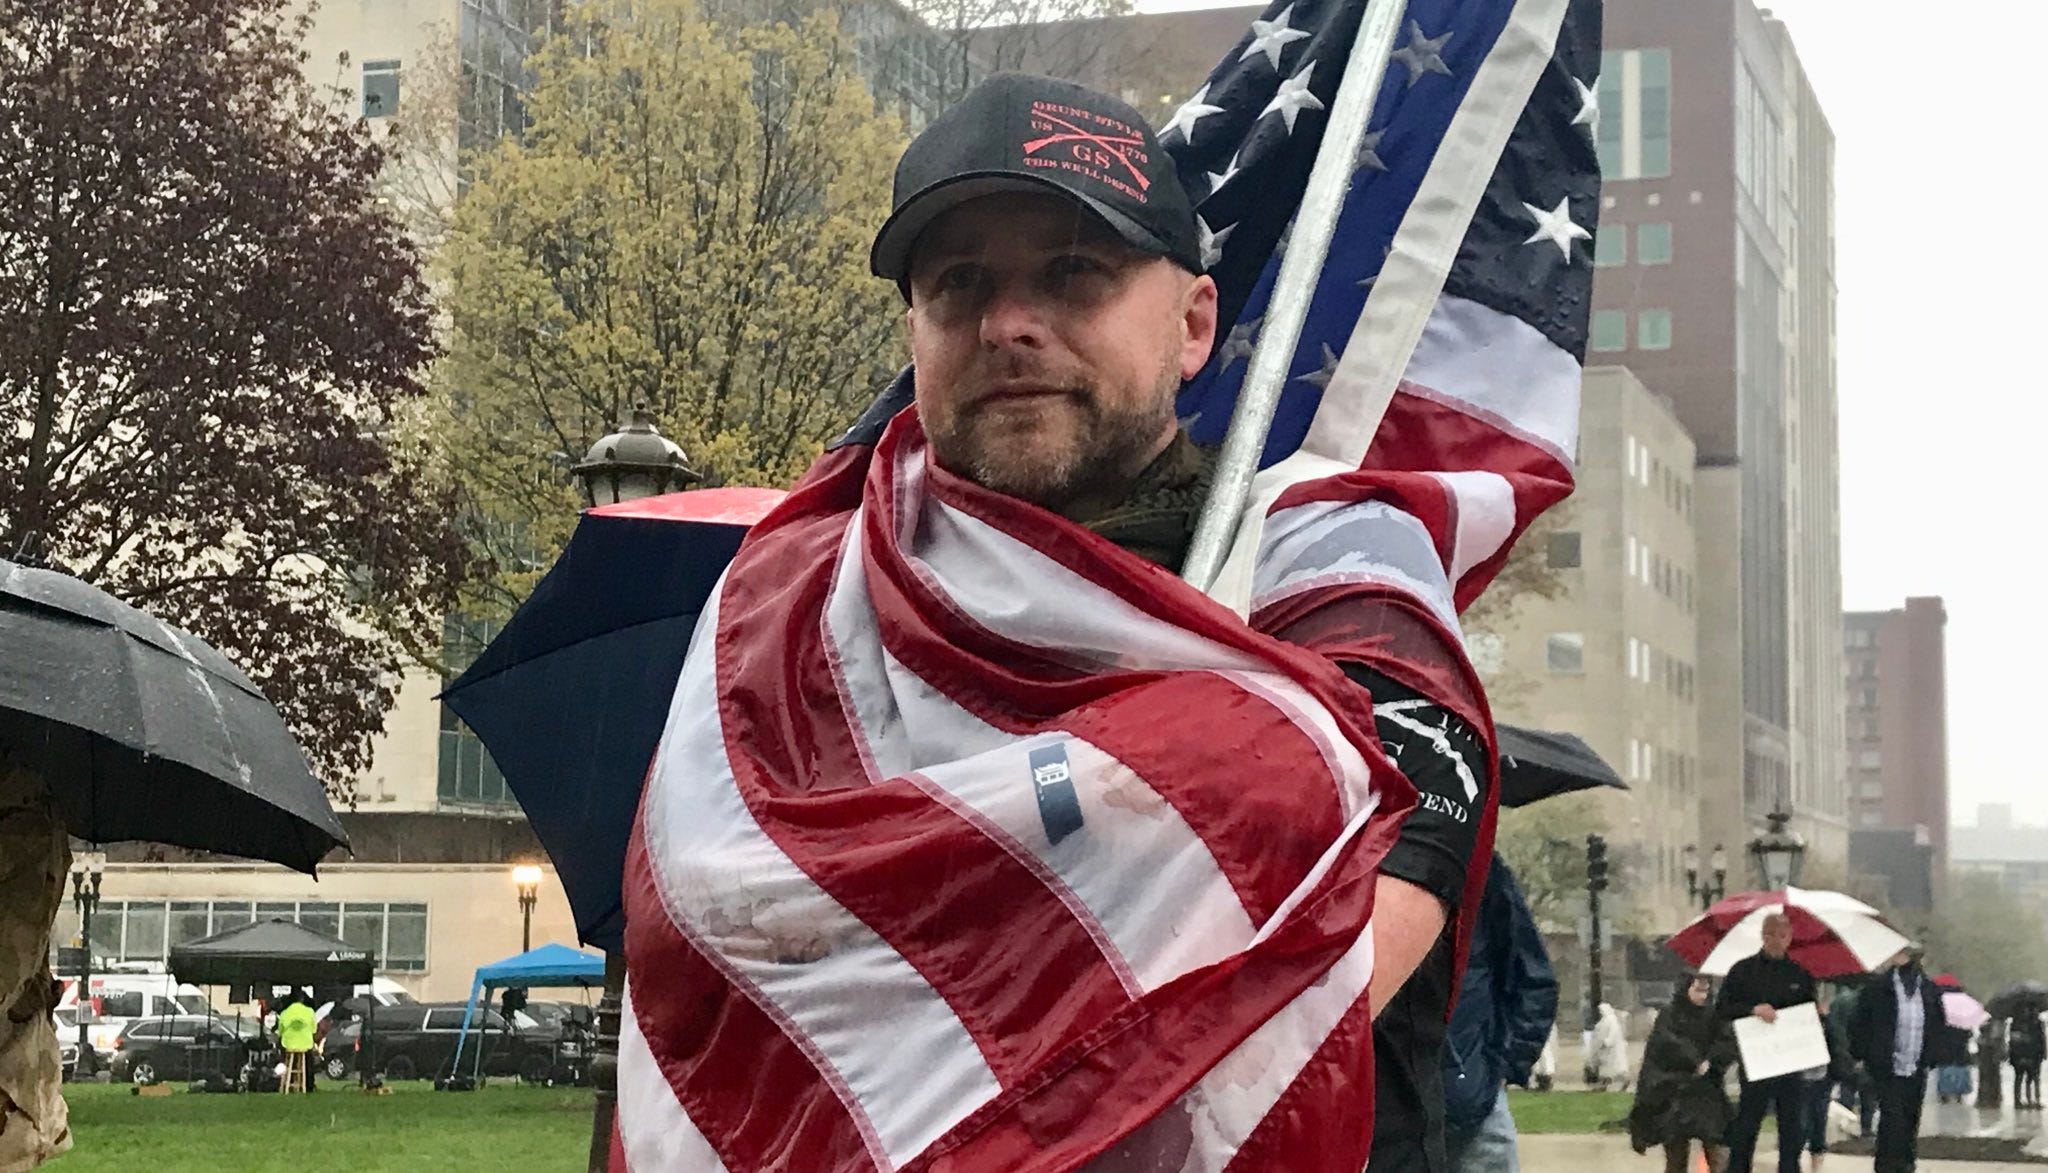 Anthony Jukuri, 36, covers himself with an American flag and watches the protest in the rain.